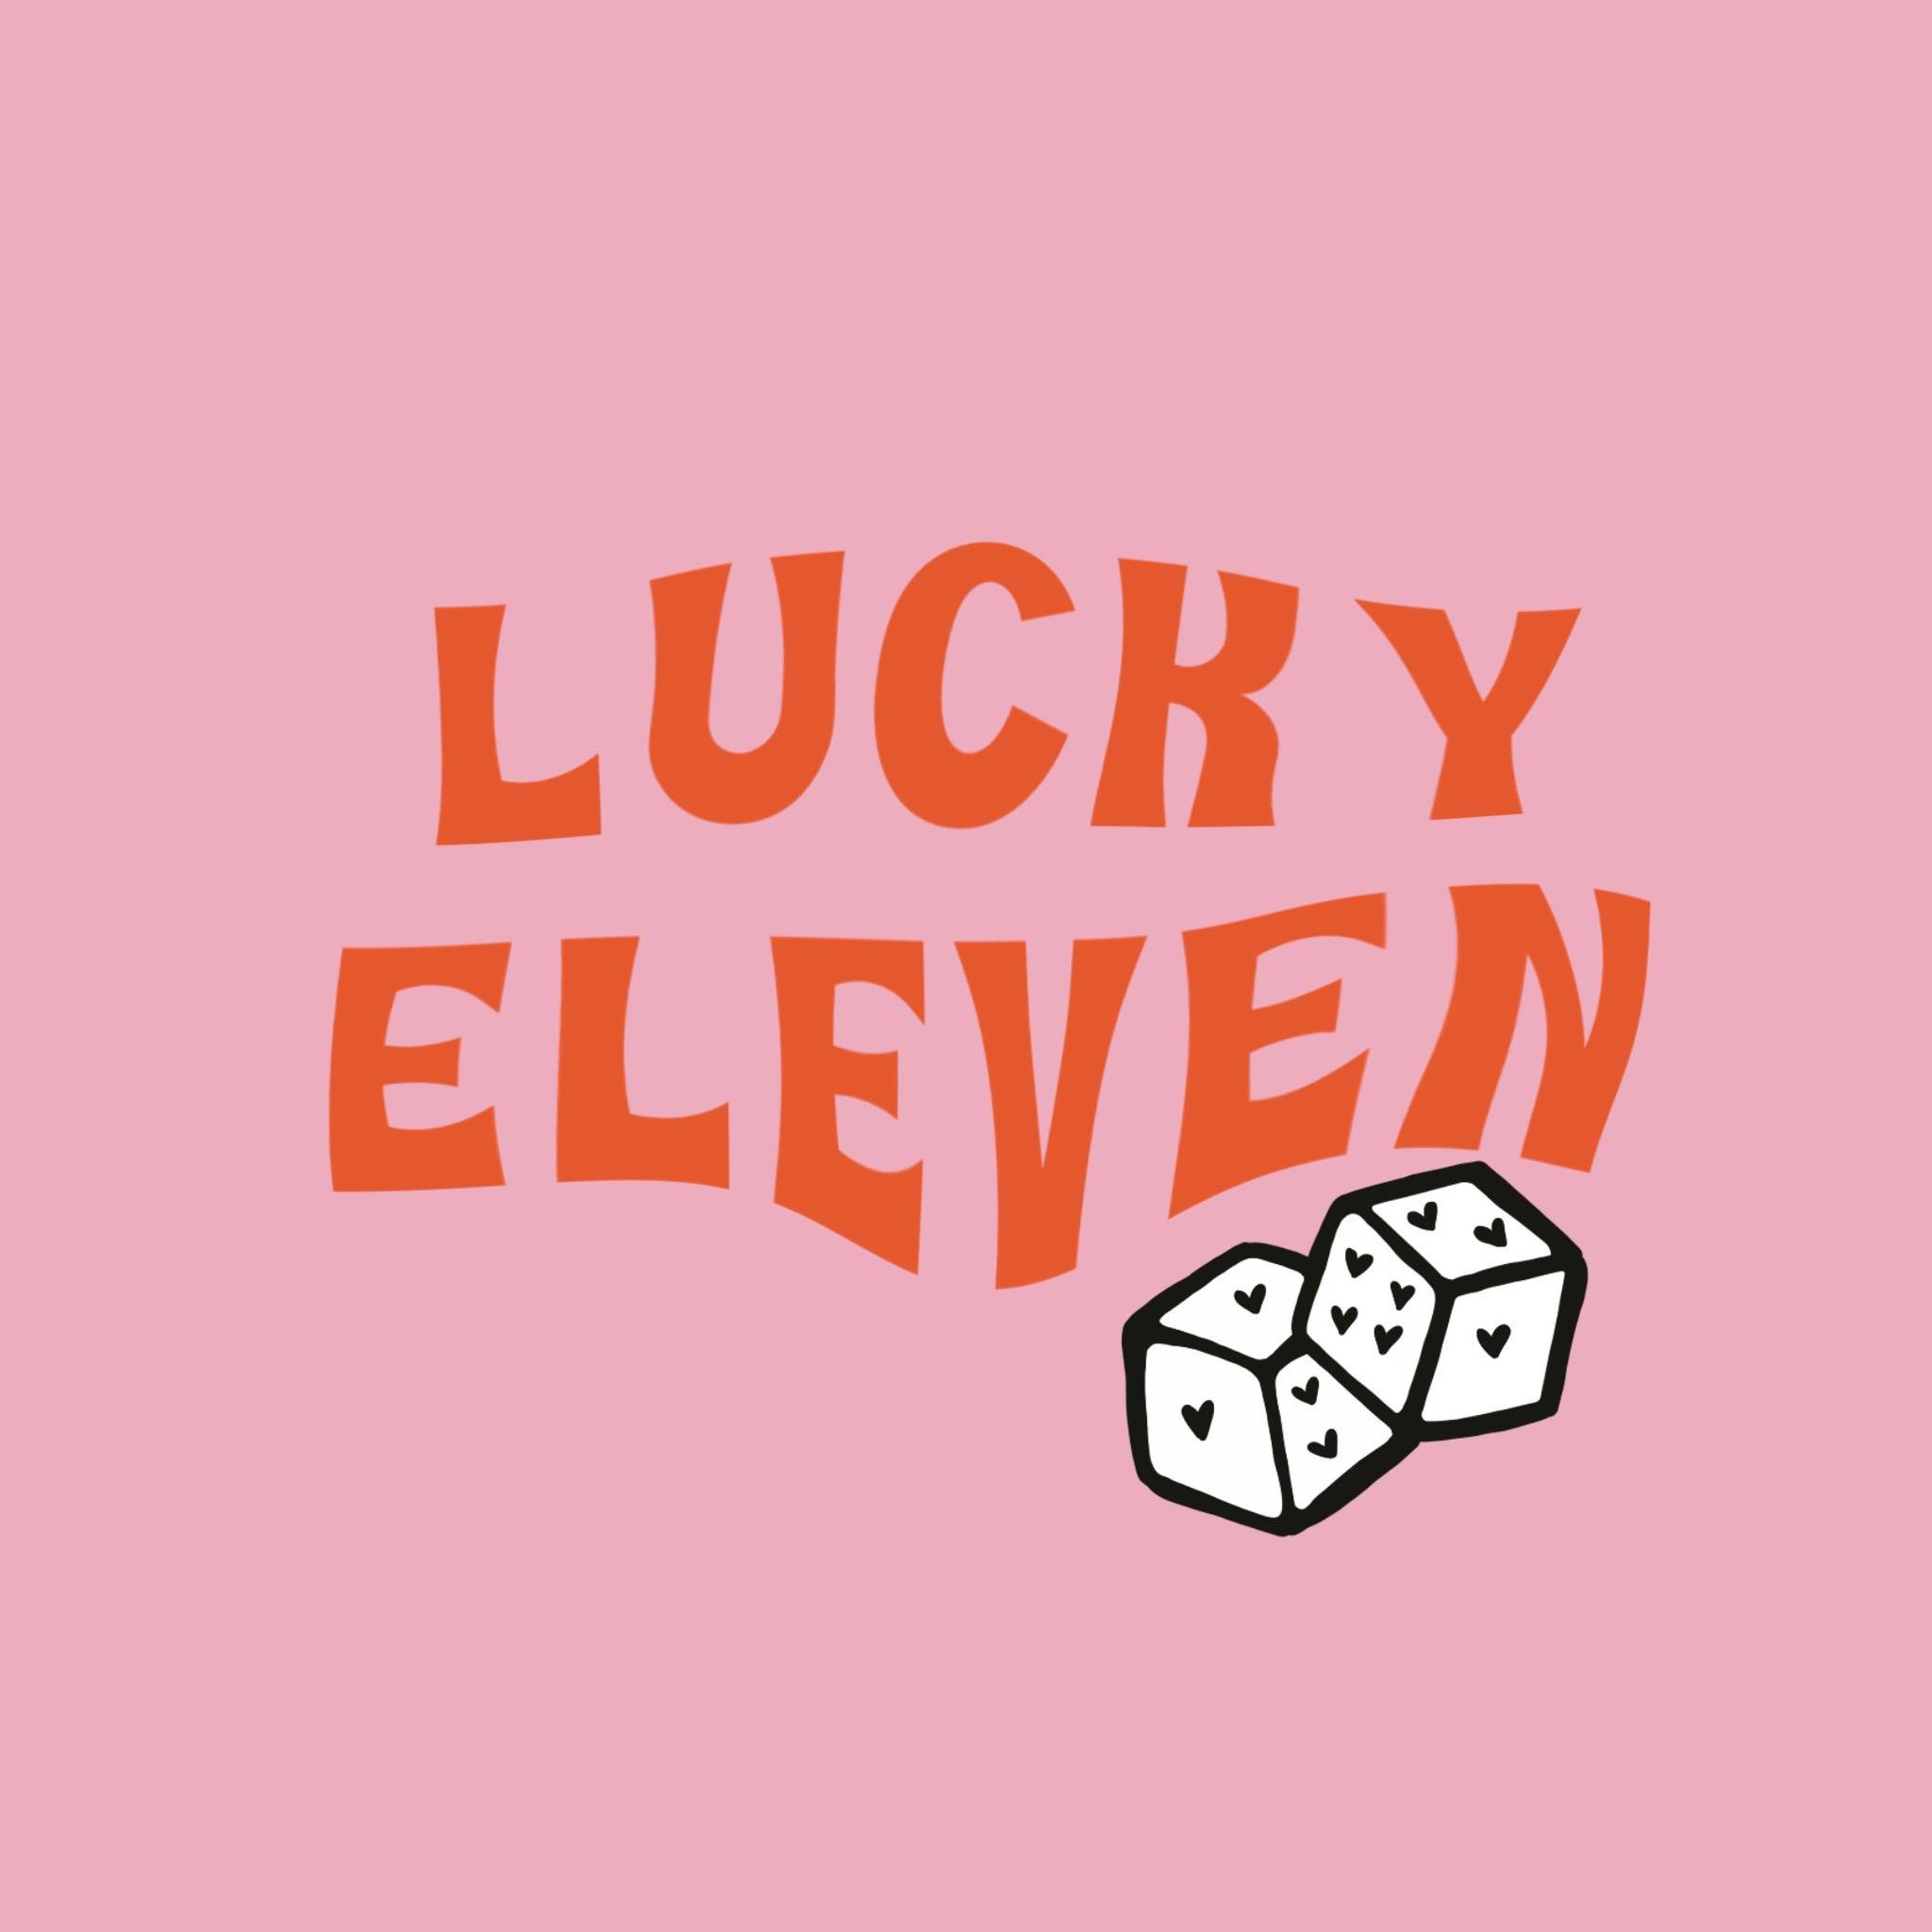 LUCKY ELEVEN